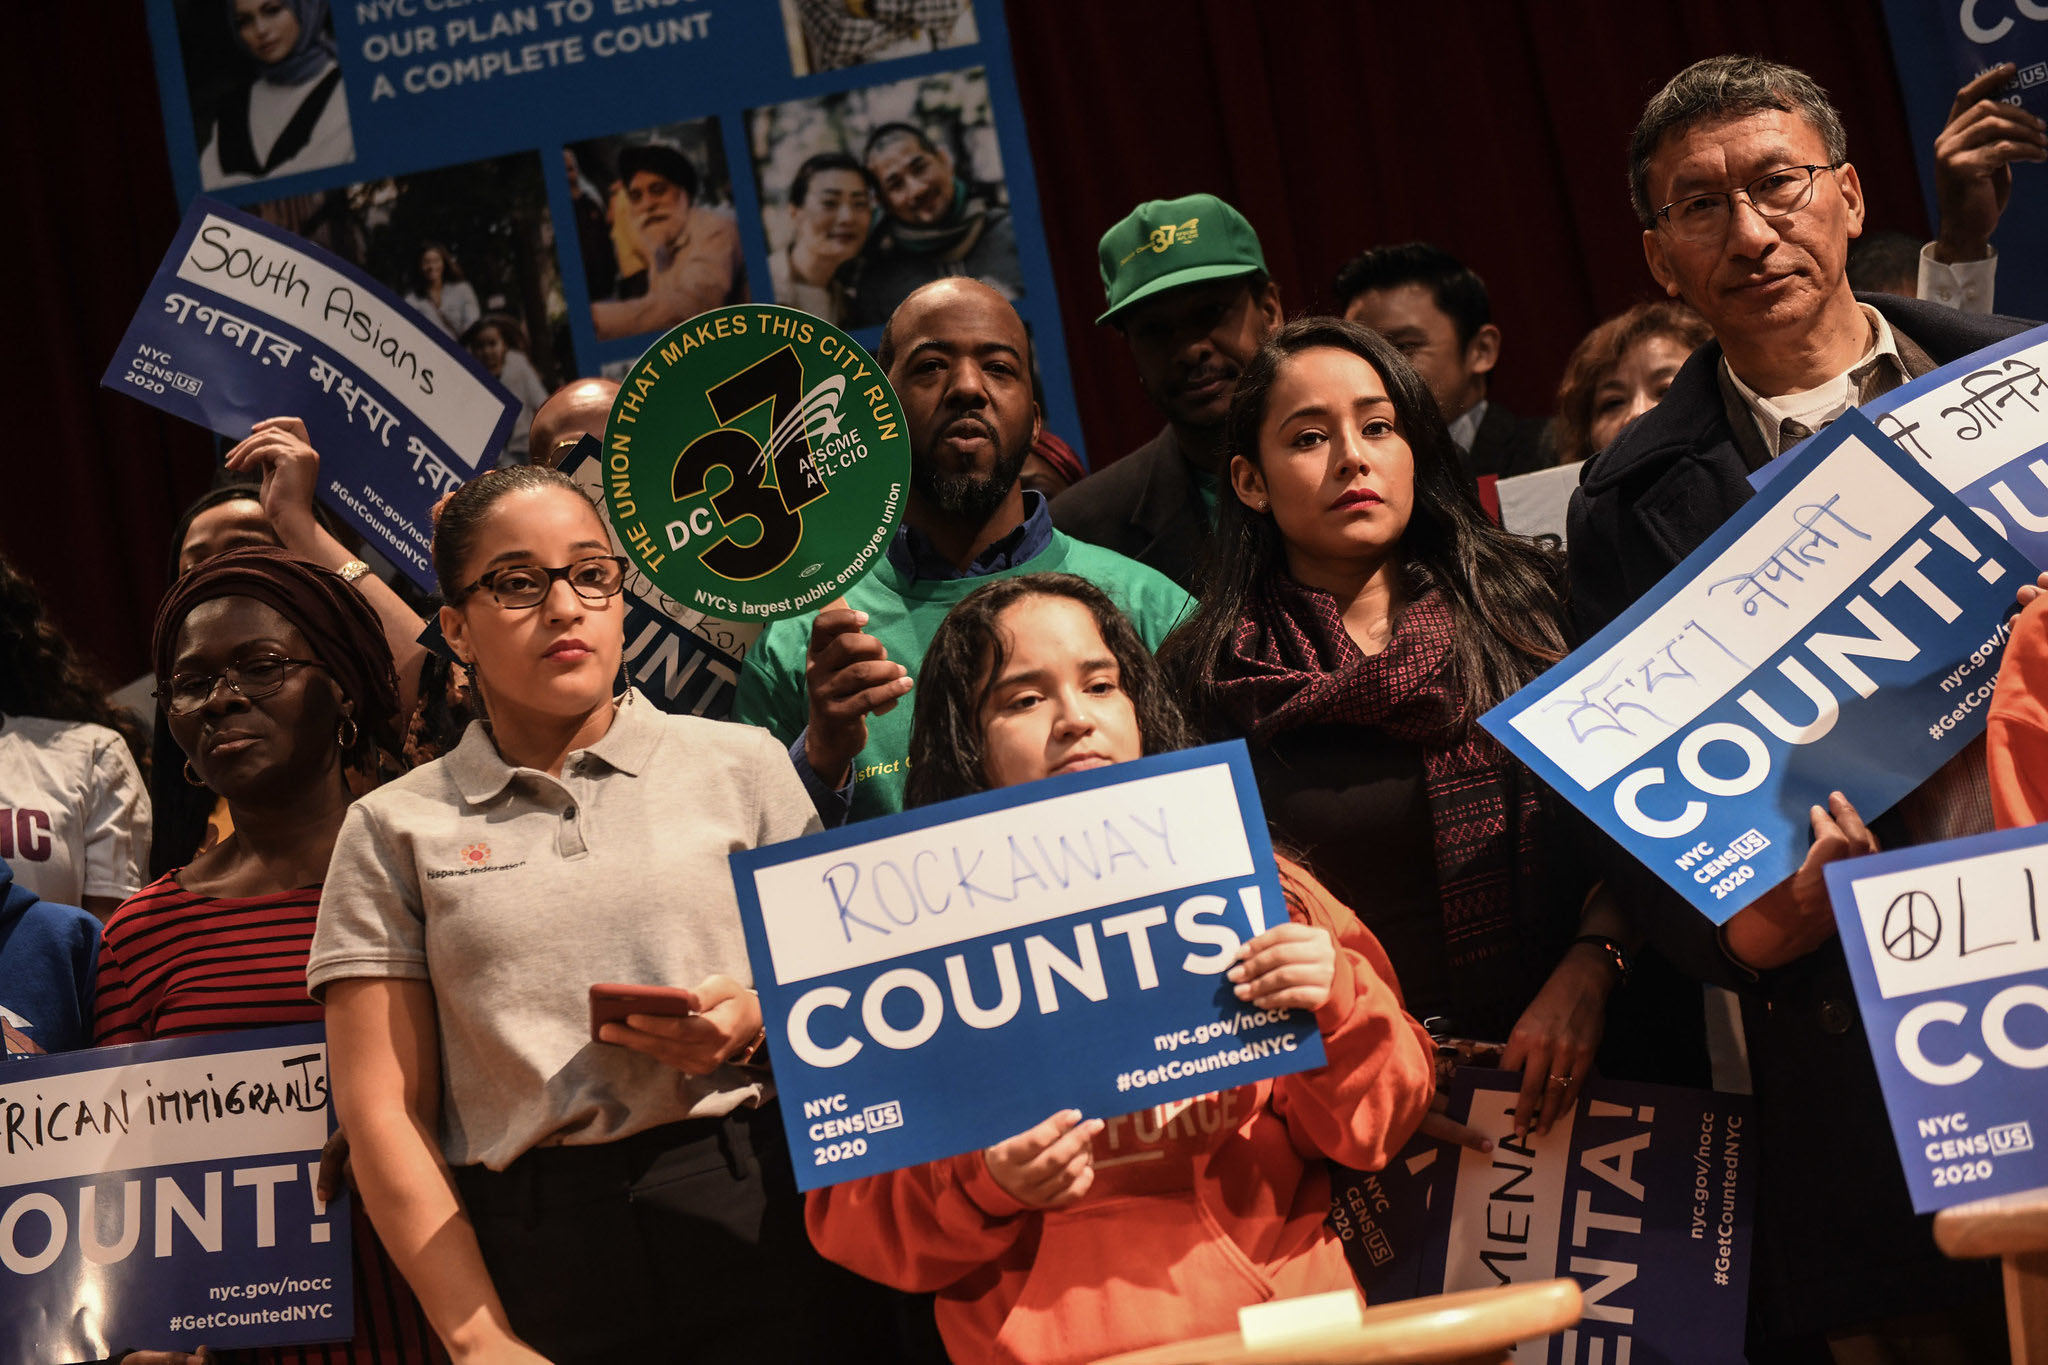 Rally to kick off the NYC Census 2020 Complete Count Campaign